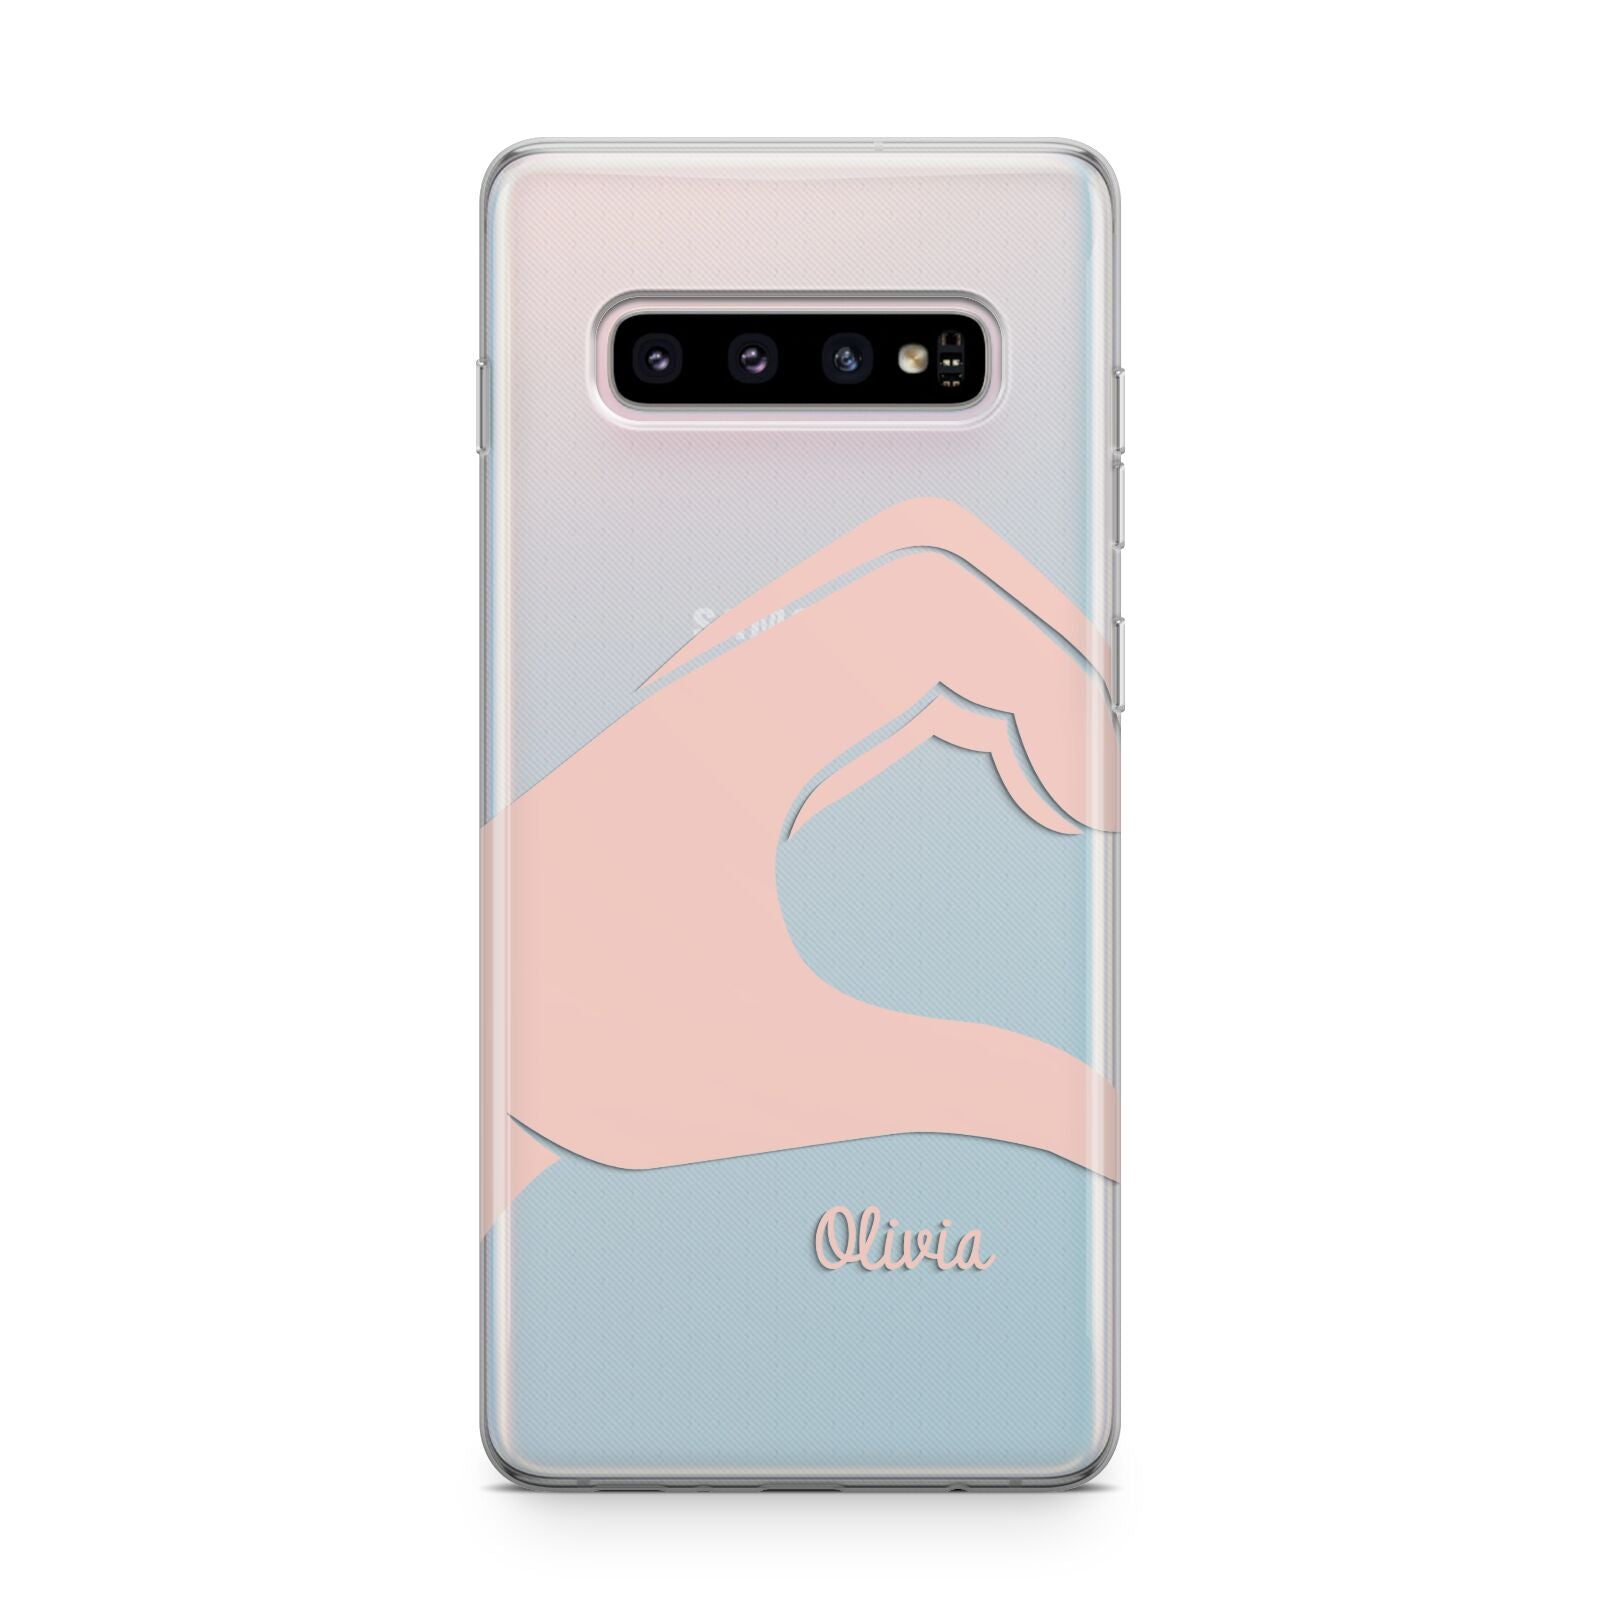 Left Hand in Half Heart with Name Samsung Galaxy S10 Plus Case